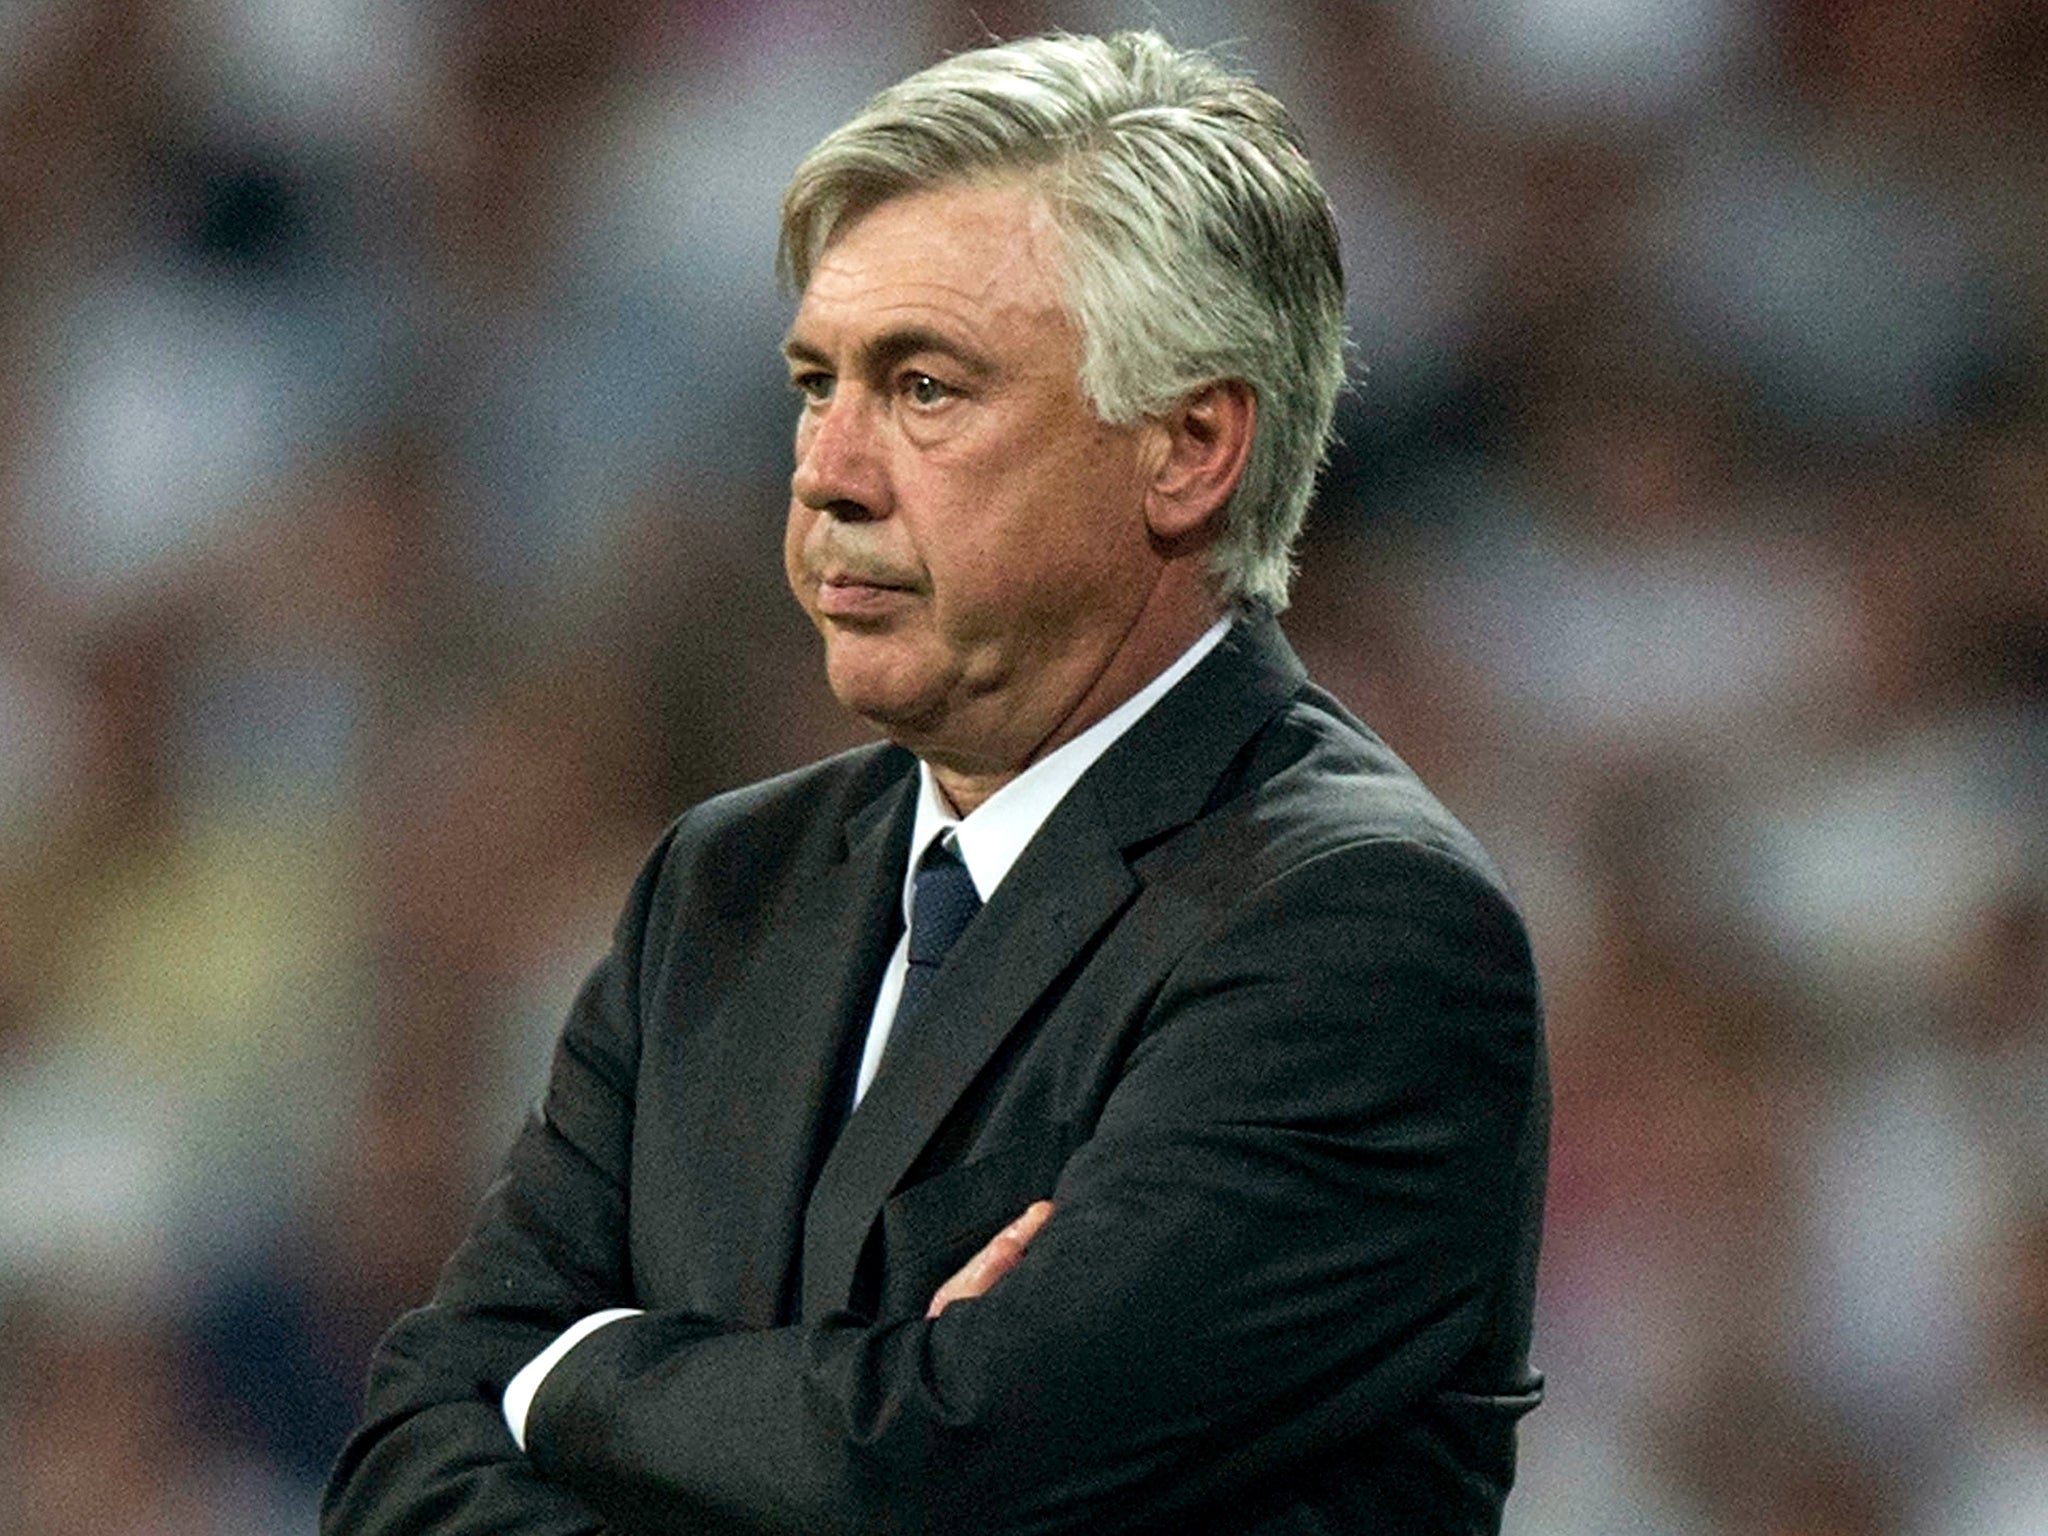 Carlo Ancelotti has been sacked by Real Madrid